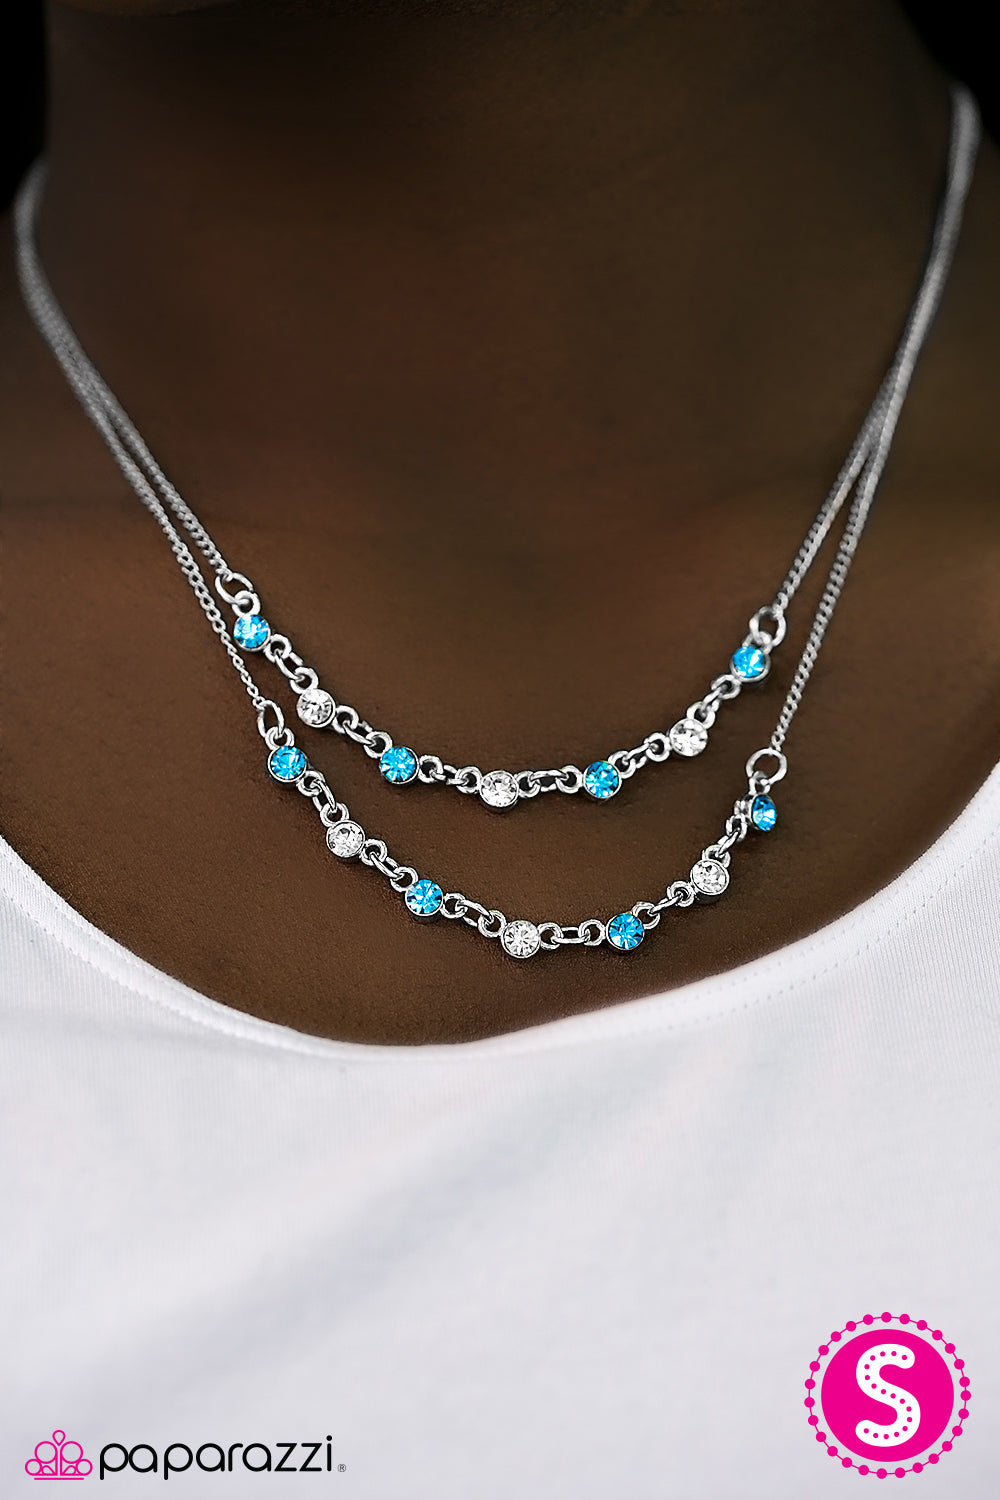 FIERCEST Of Them All - Blue - Paparazzi necklace